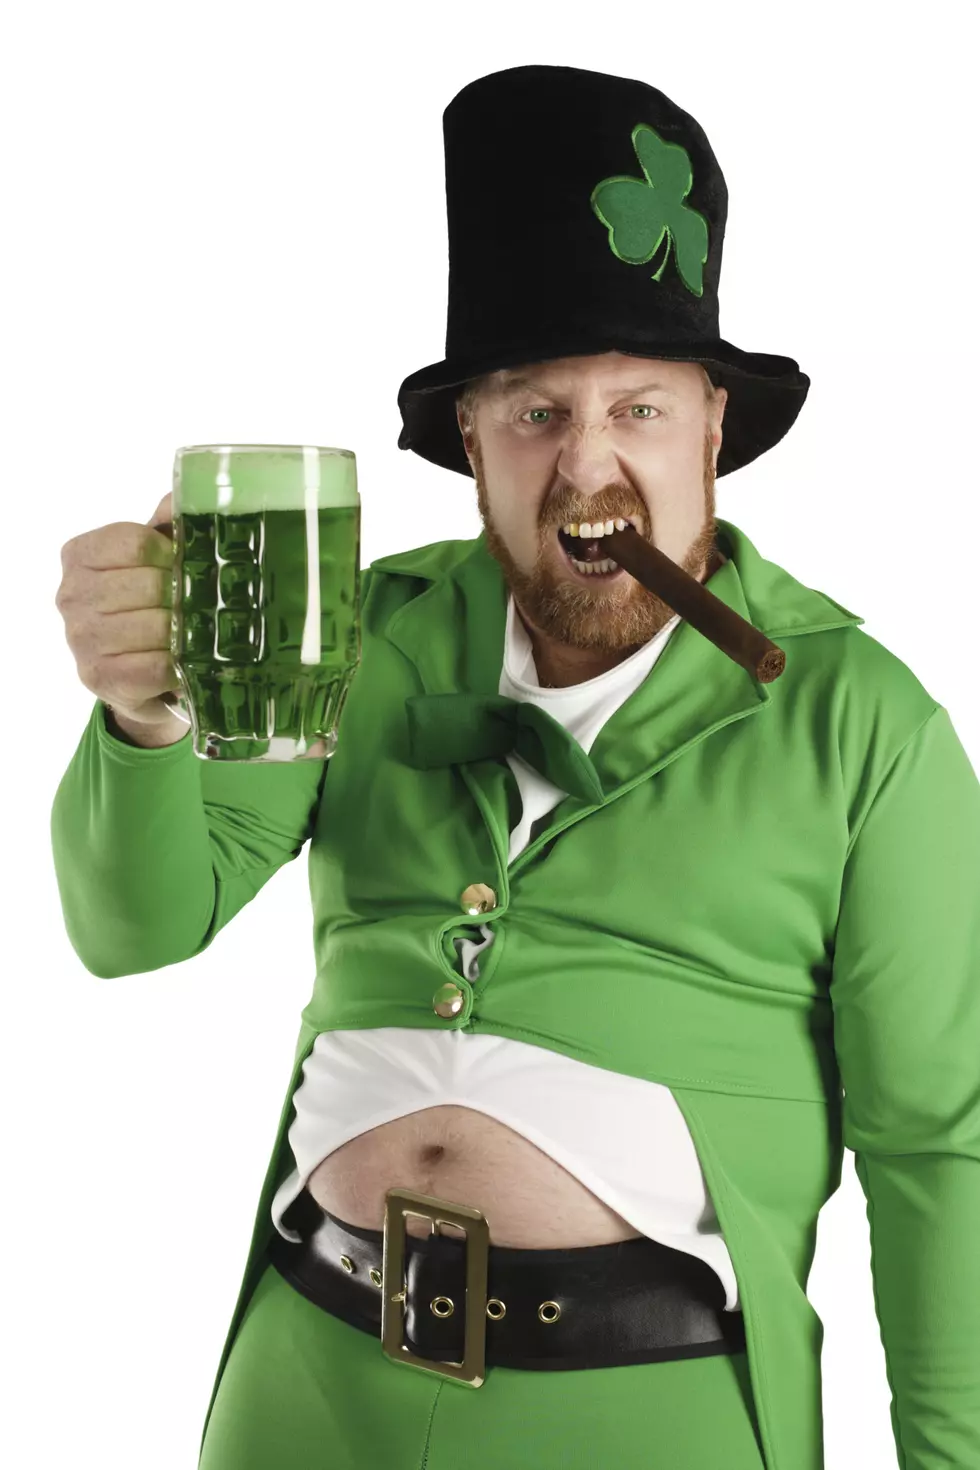 Wear Your St. Patty's Day Best